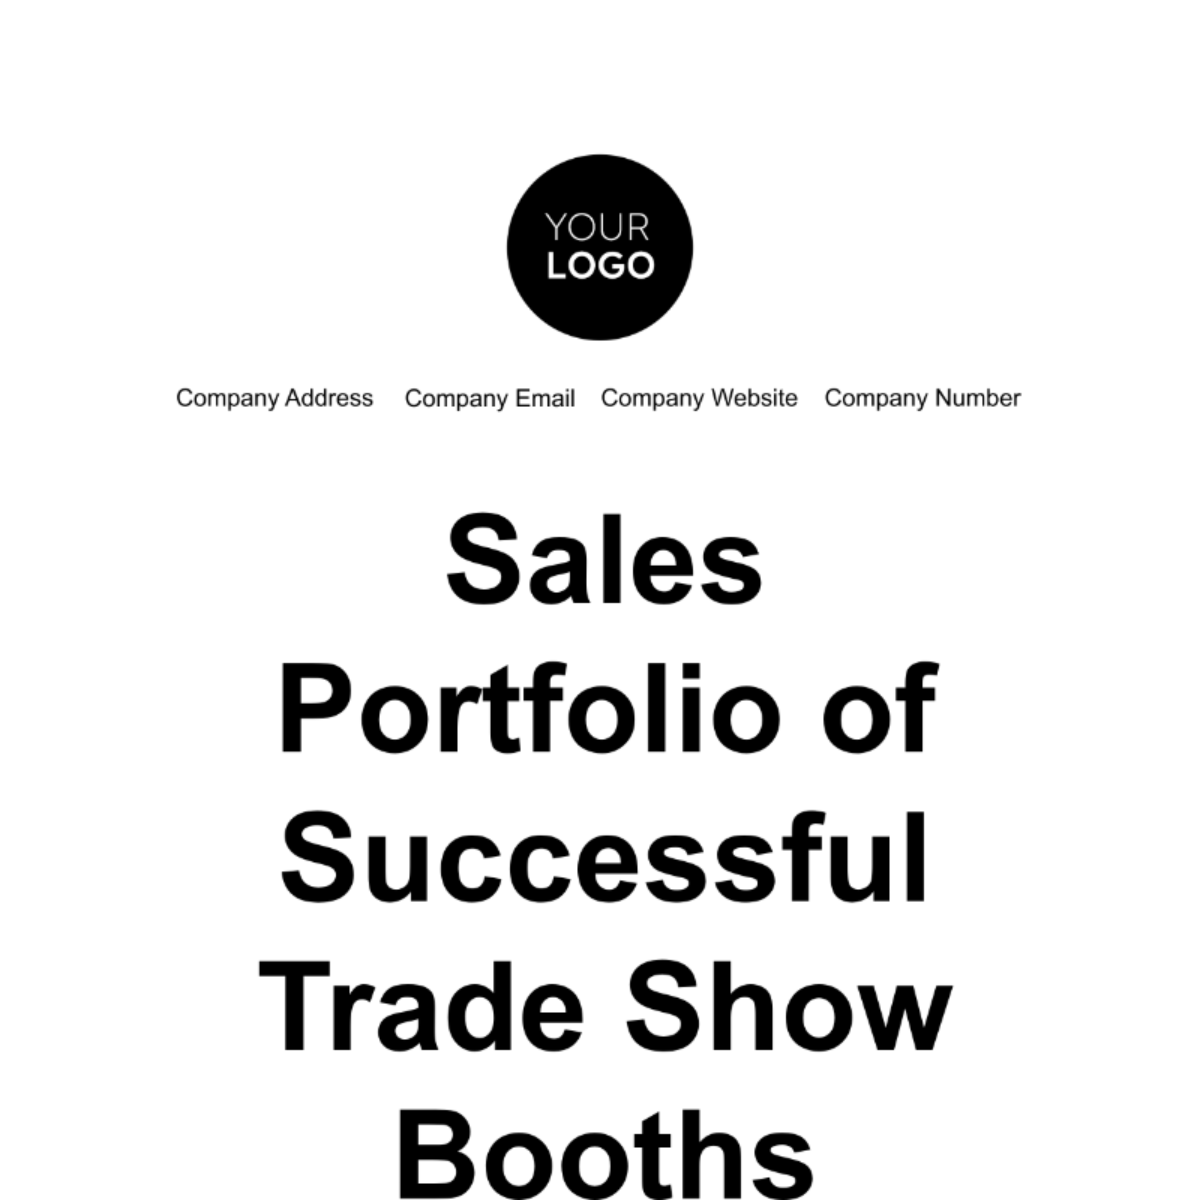 Free Sales Portfolio of Successful Trade Show Booths Template